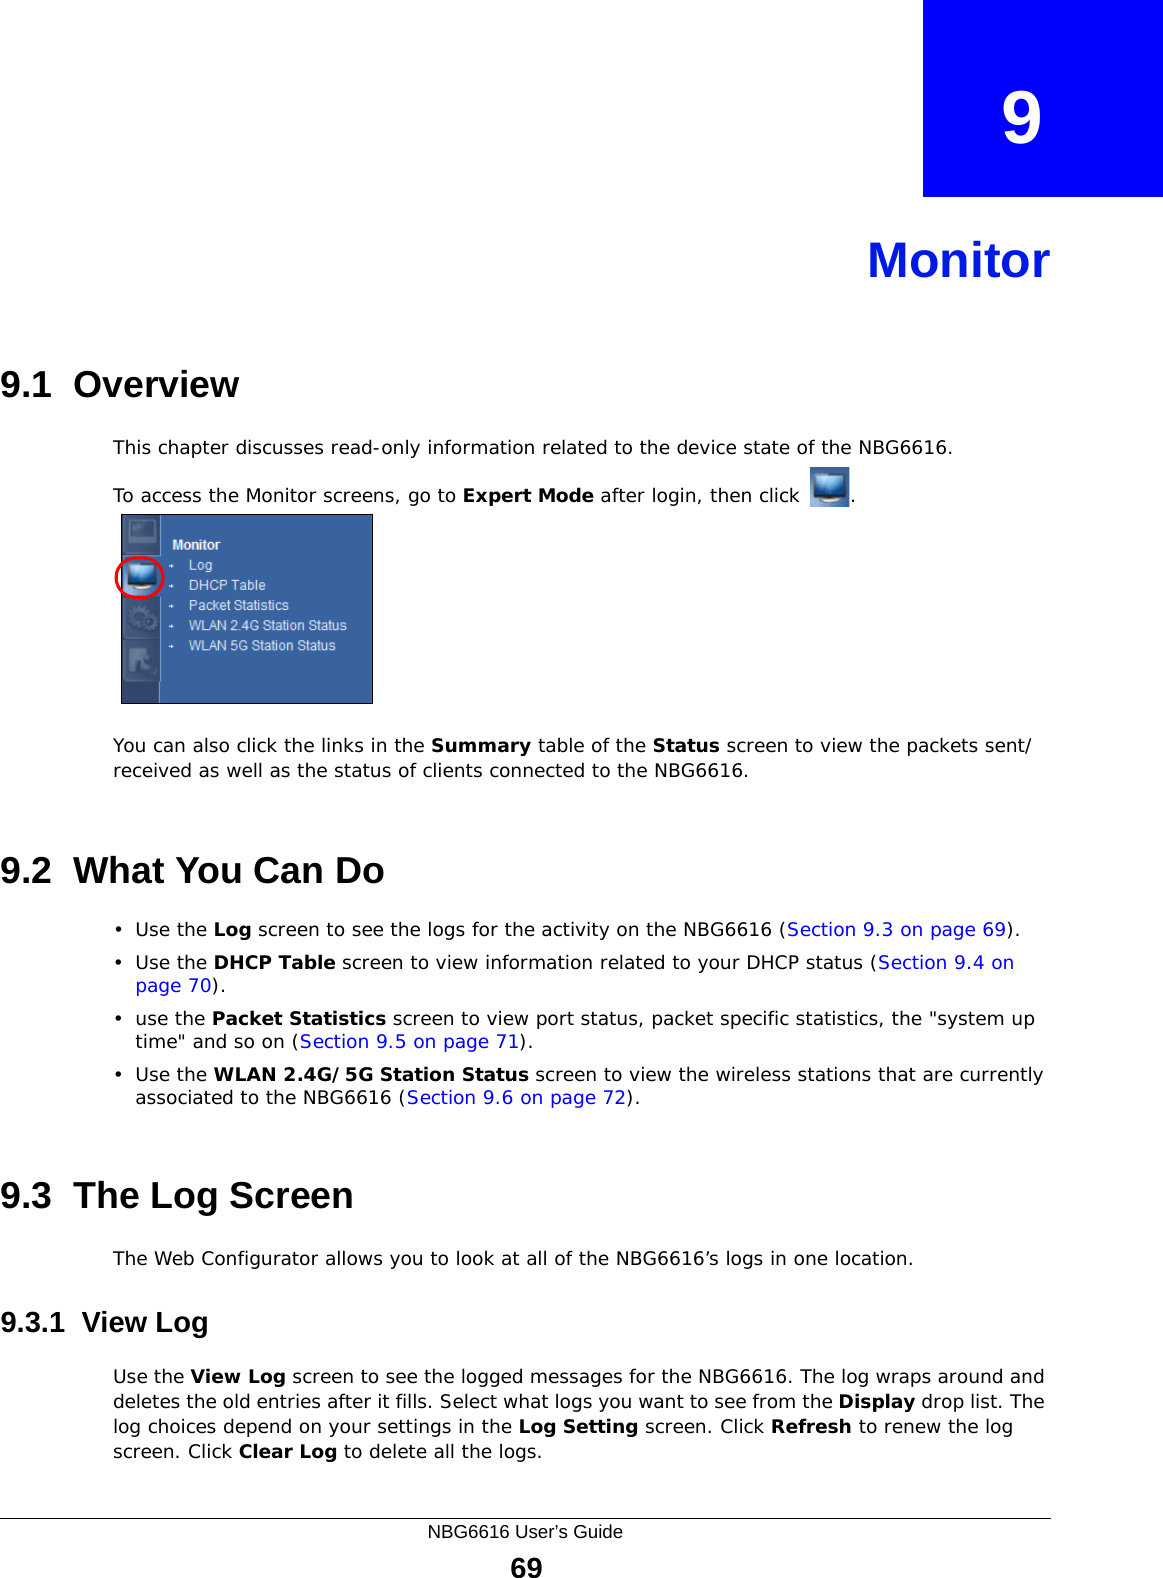 NBG6616 User’s Guide69CHAPTER   9Monitor9.1  OverviewThis chapter discusses read-only information related to the device state of the NBG6616. To access the Monitor screens, go to Expert Mode after login, then click  .  You can also click the links in the Summary table of the Status screen to view the packets sent/received as well as the status of clients connected to the NBG6616.9.2  What You Can Do•Use the Log screen to see the logs for the activity on the NBG6616 (Section 9.3 on page 69).•Use the DHCP Table screen to view information related to your DHCP status (Section 9.4 on page 70).•use the Packet Statistics screen to view port status, packet specific statistics, the &quot;system up time&quot; and so on (Section 9.5 on page 71).•Use the WLAN 2.4G/5G Station Status screen to view the wireless stations that are currently associated to the NBG6616 (Section 9.6 on page 72).9.3  The Log ScreenThe Web Configurator allows you to look at all of the NBG6616’s logs in one location.9.3.1  View LogUse the View Log screen to see the logged messages for the NBG6616. The log wraps around and deletes the old entries after it fills. Select what logs you want to see from the Display drop list. The log choices depend on your settings in the Log Setting screen. Click Refresh to renew the log screen. Click Clear Log to delete all the logs.